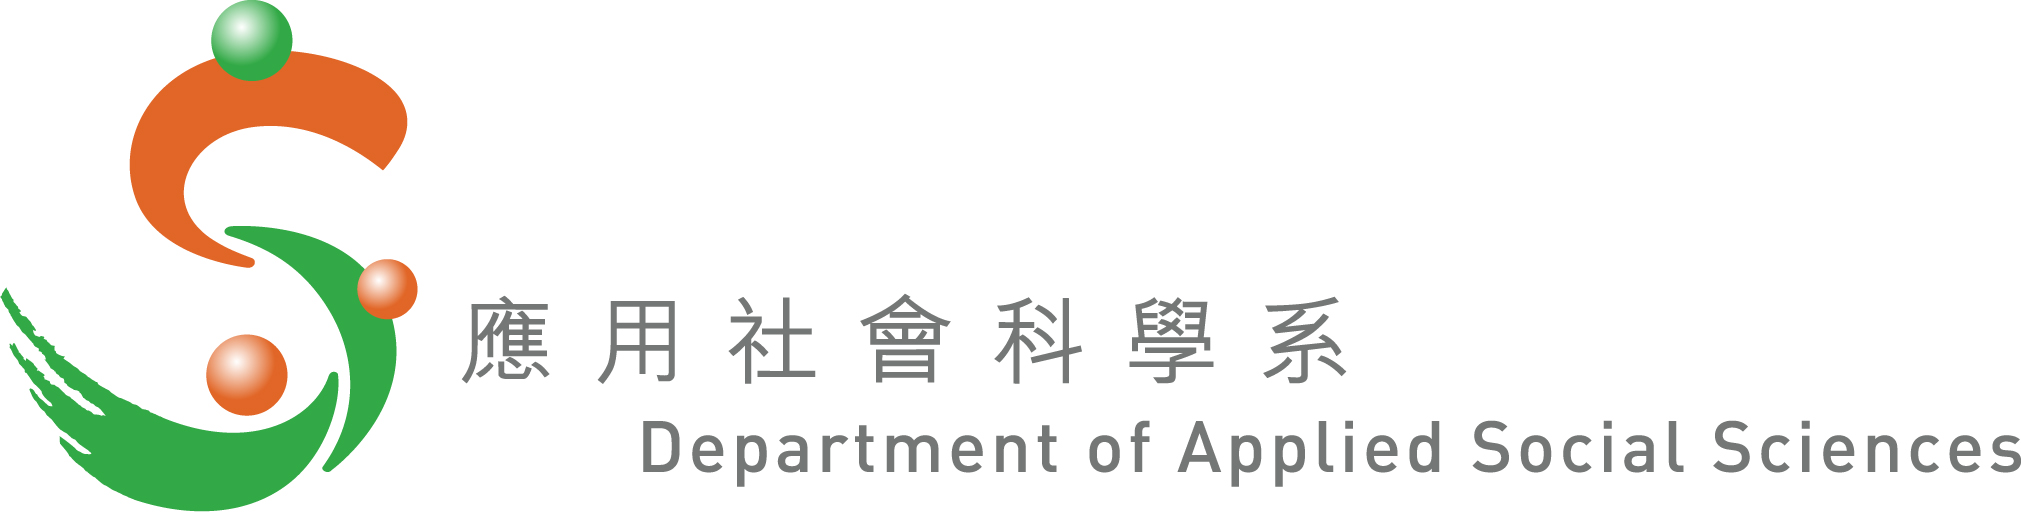 Department of Applied Social Sciences